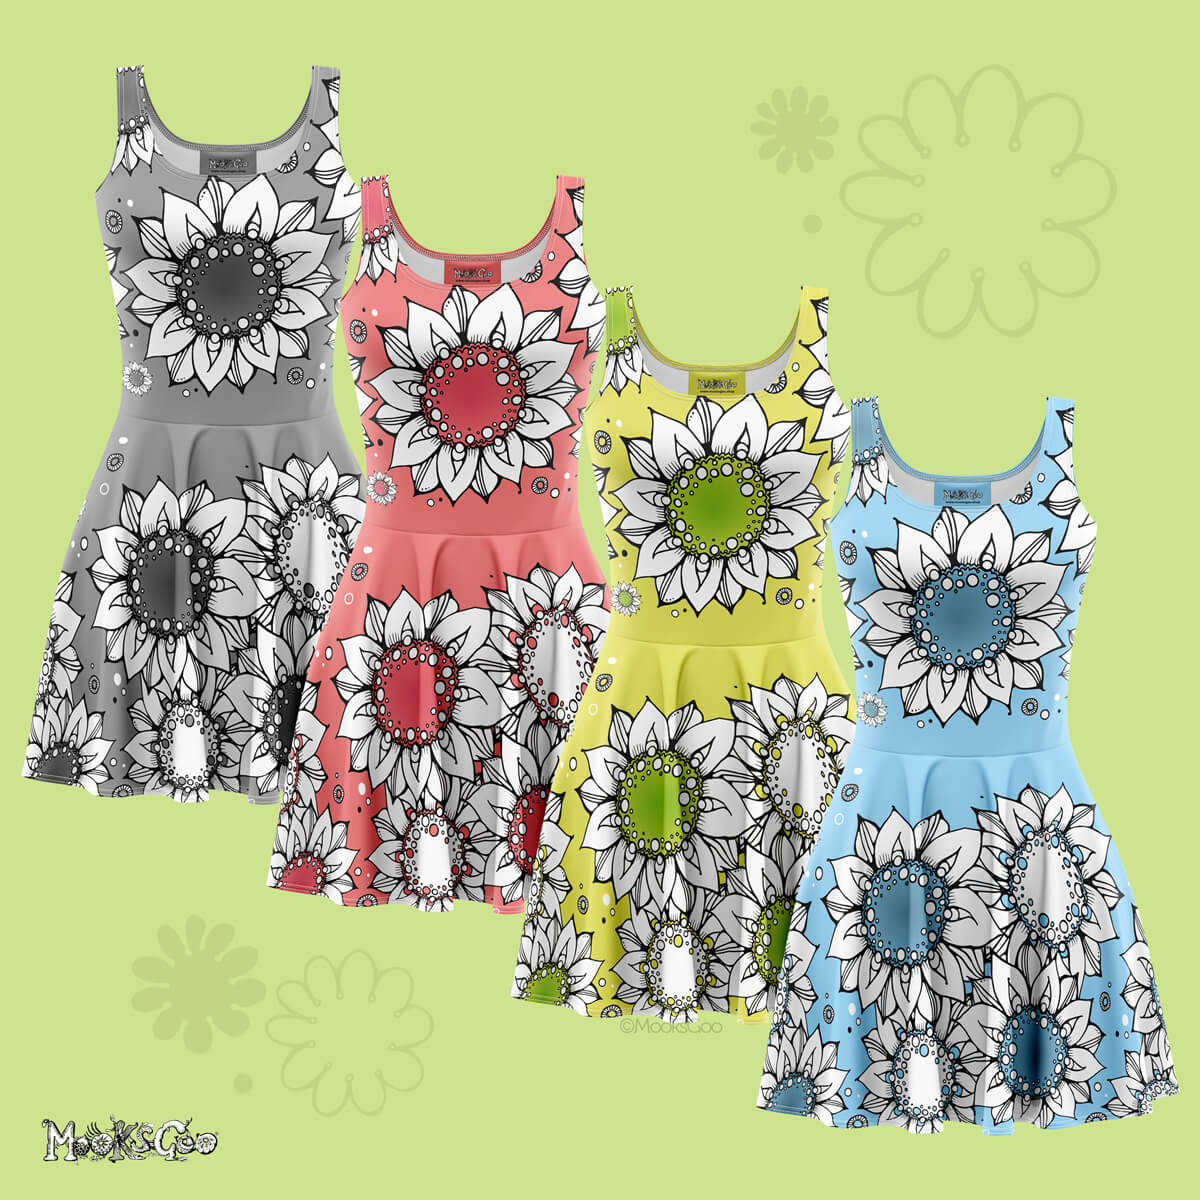 Floaty, funky, colourful silky skater dresses in grey, coral pink, lime green, and sky blue. Large and bold sunflower designs illustrated by MooksGoo